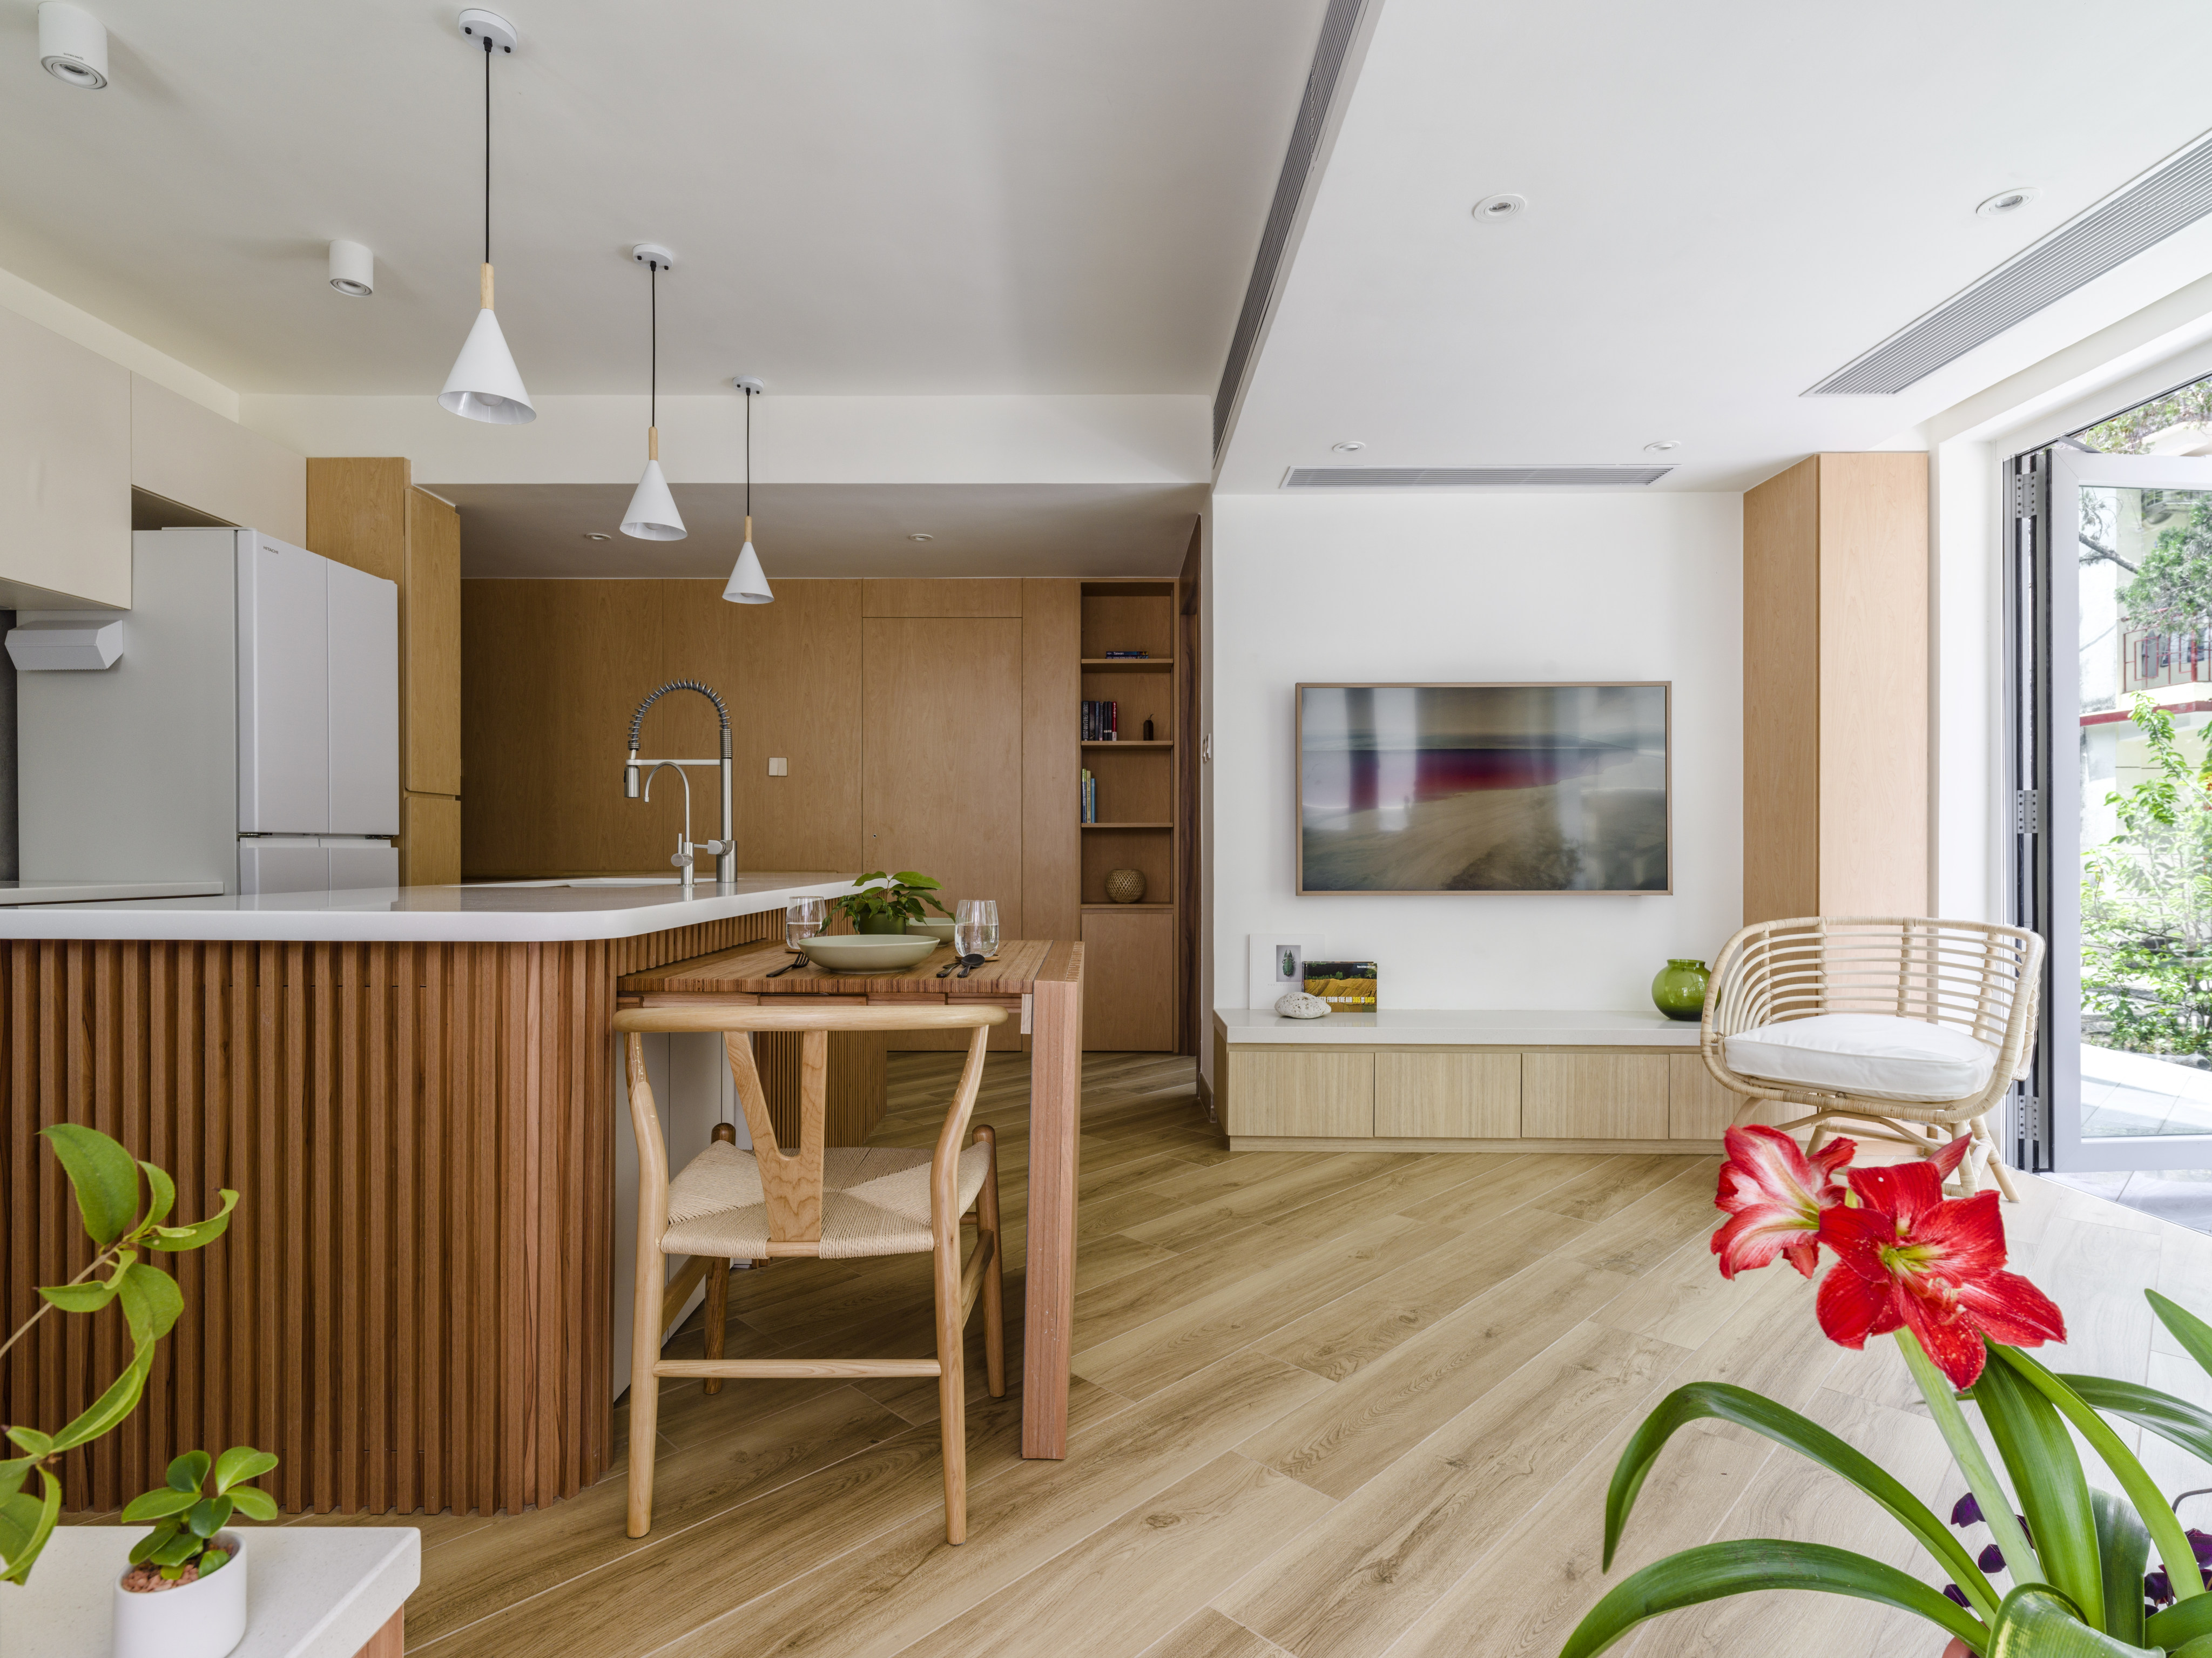 This elderly friendly New Territories flat in Hong Kong was inspired by a century-old longan tree. Photo: John Butlin. Styling: Flavia Markovits; Photo assistant: Timothy Tsang